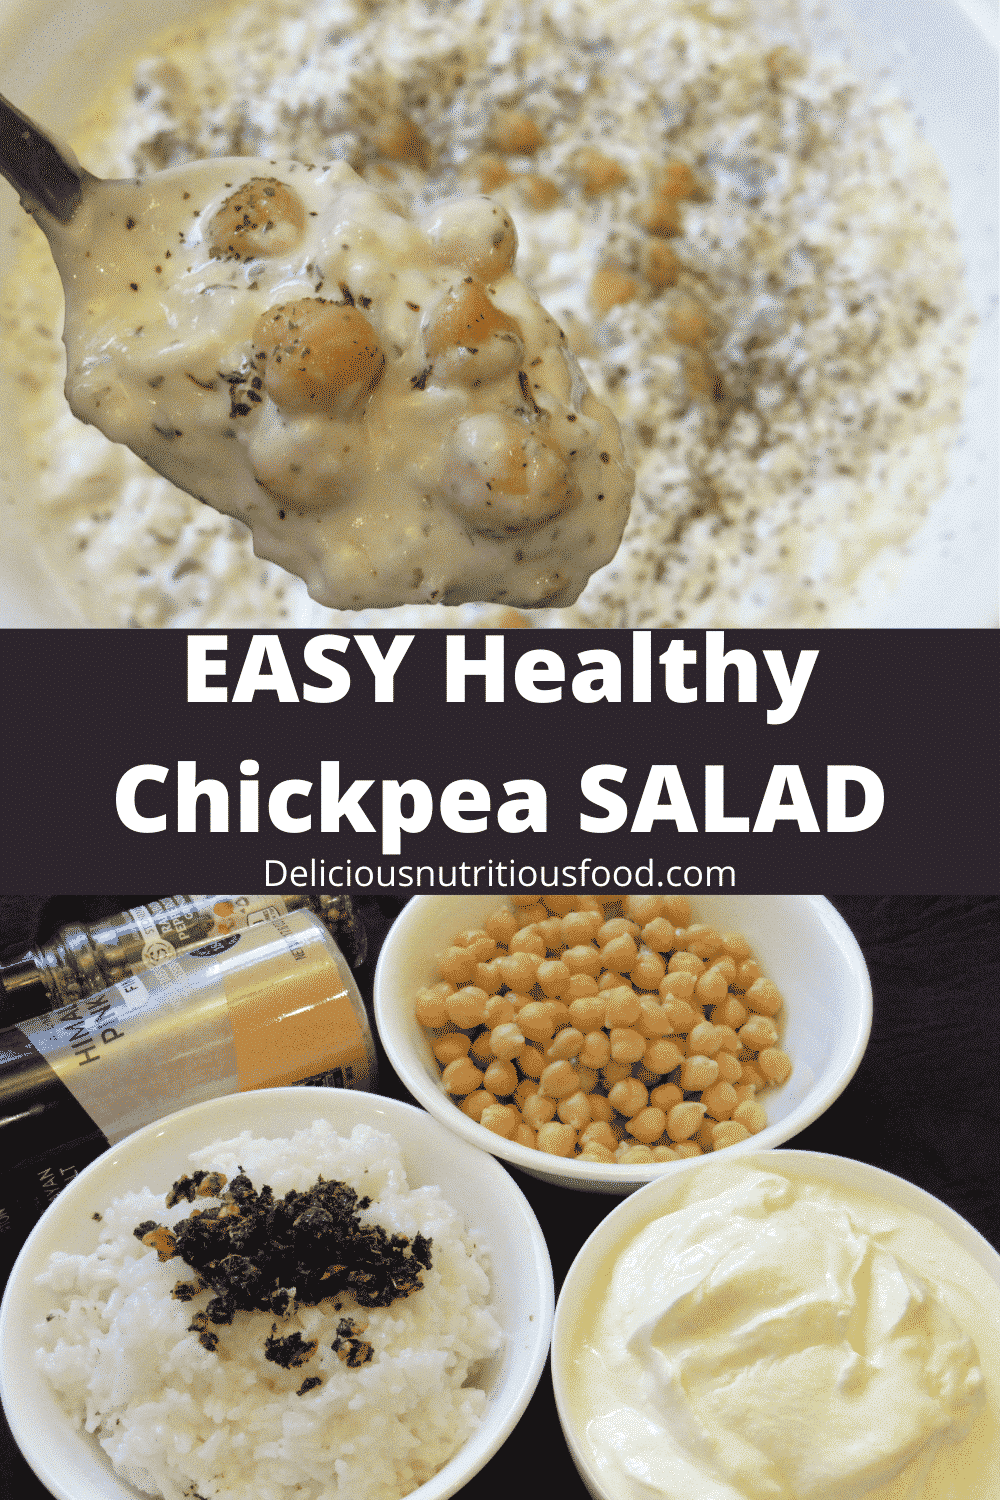 How to make the BEST chickpea salad with yogurt #chickpeasaladwithyogurtdressing #chickpeasaladwithyogurt #chickpeasaladyogurt #yogurtchickpeasalad #thebestsalad #homemadesalad #goodsalads #saladrecipes #saladideas #saladrecipesfordinner #recipes #homemade #saladrecipeshealthy #recipesIlove #5ingredientsrecipies #deliciousnutritiousfodds #sides #sidedishes #tastysides #easysidedishes #healthysides #summersidedishes #chickpeasandyogurt #chickpeasalad #chickepeasaladrecipe #recipechickpeasalad #howtomakechickpeasalad #chickpeasaladnomayo #chickpeasaladrecipe #easychickpeasalad #bestchickpeasalad #easyrecipeswithchickpeas #healthychickpeasalad #chickpearecipessalad #chickpeasaladhealthy #chickpearecipes #5ngredientsrecipes #chickpeas #deliciousnutritiousfoods #easyrecipes #easysidedishes #foodie #fromscratchrecipes #healthyfood #healthyrecipes #healthysnack #homemade #quickrecipes #salad #simplerecipes #summersaladrecipes #vegeterianrecipes